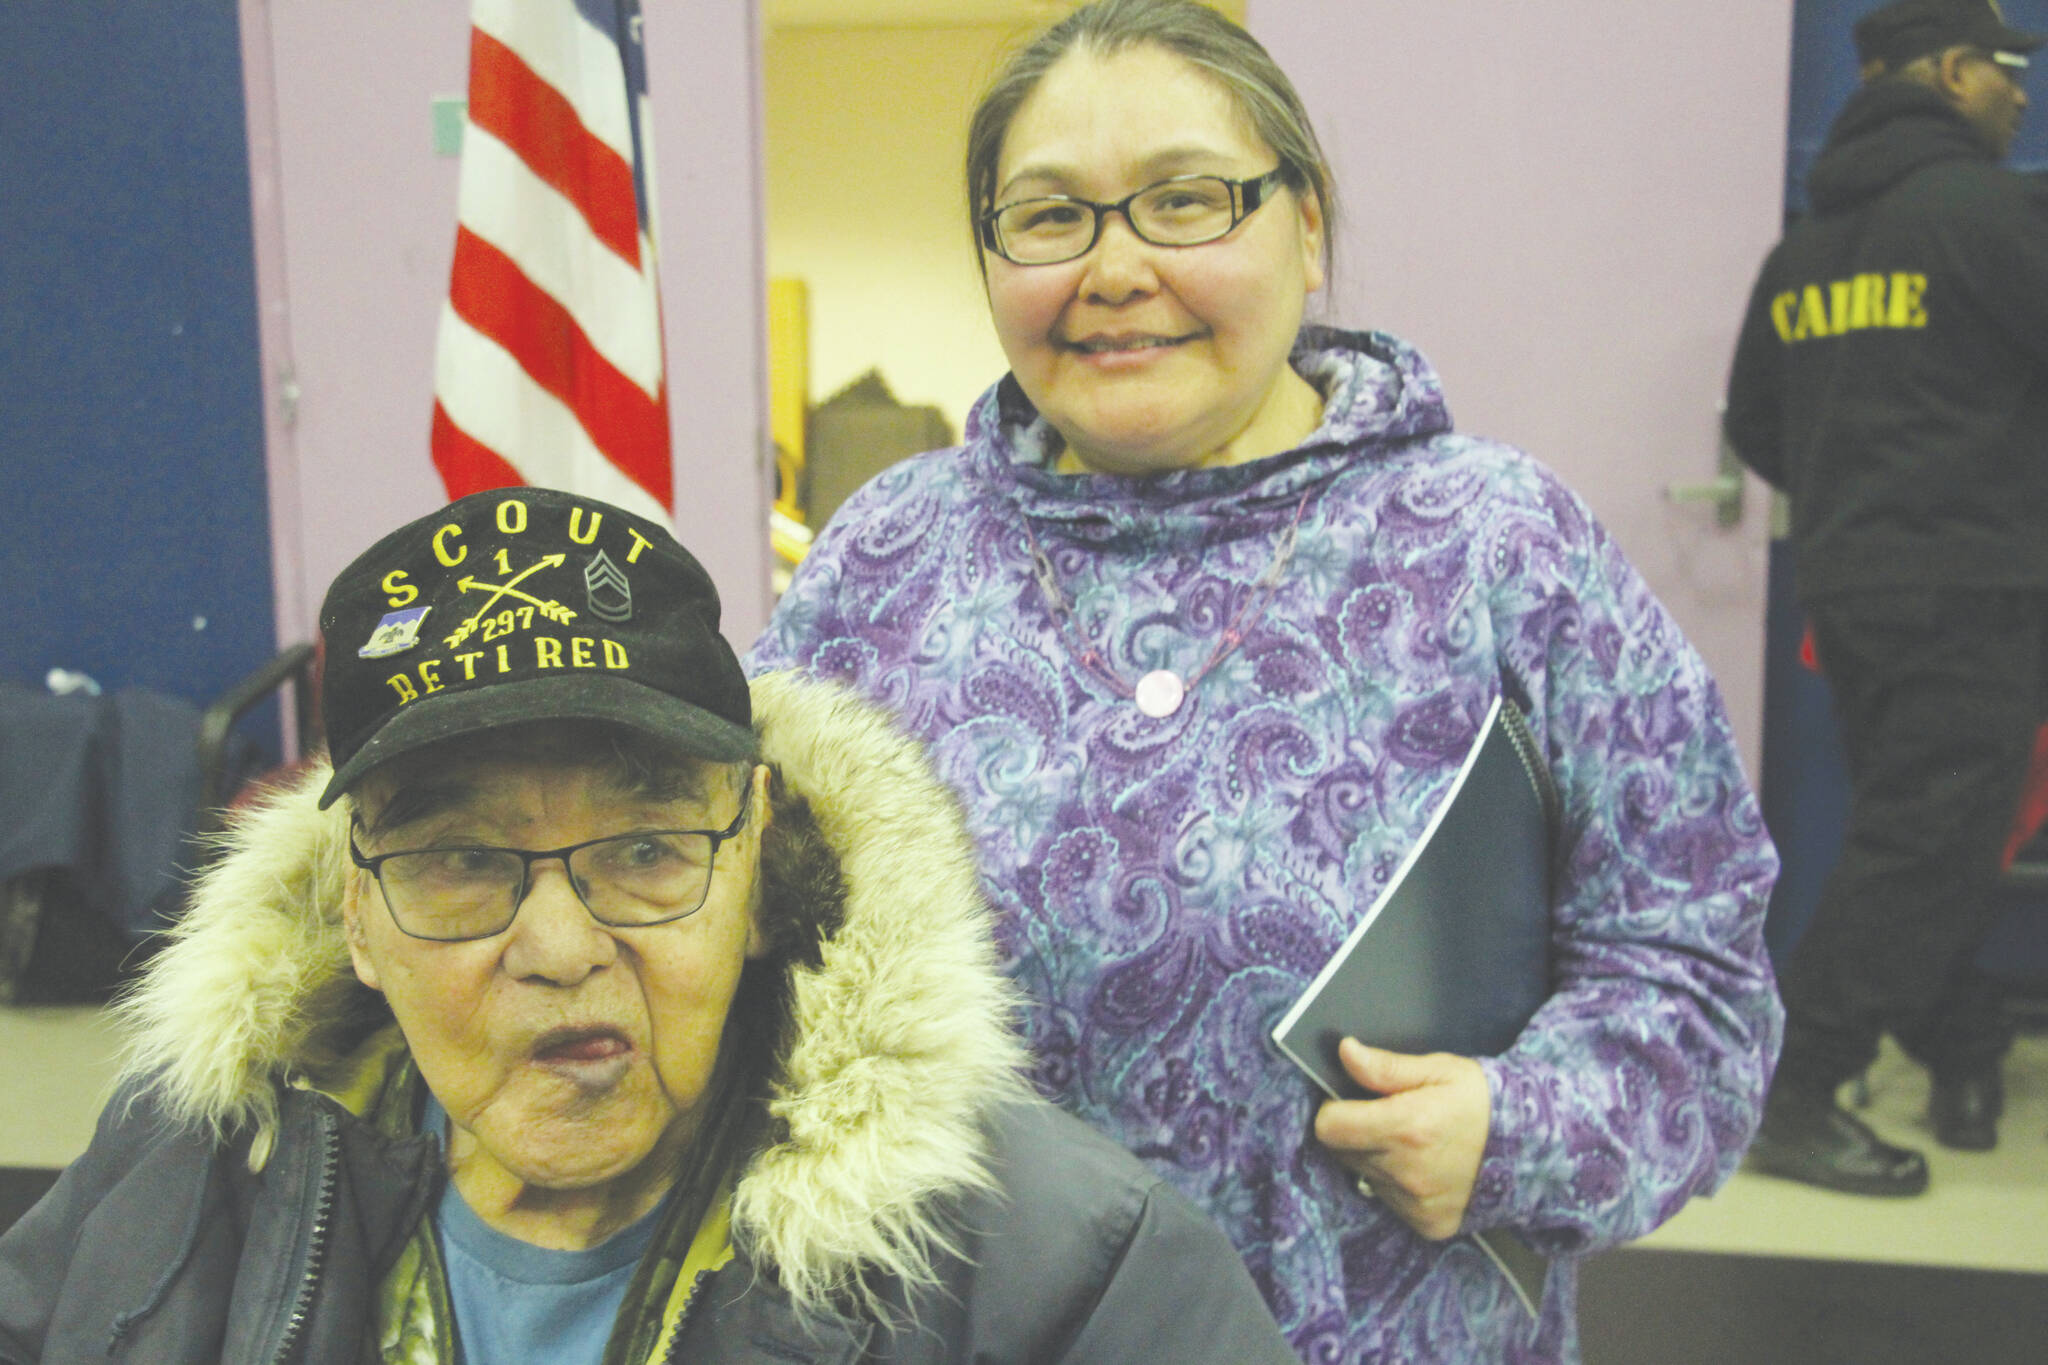 AP Photo/Mark Thiessen
This March 28 photo shows Bruce Boolowon, left, posing with his eldest daughter, Rhona Pani Apassingok, at an Alaska National Guard ceremony in Gambell. Maj. Gen. Torrence Saxe, the adjutant general of the Alaska National Guard, presented Alaska Heroism Medals to Boolowon, the last surviving guardsman of 16 who helped rescue 11 Navy crewmen after they crash landed on St. Lawrence Island on June 22, 1955, and to the family members of 15 other guardsman who are now deceased.